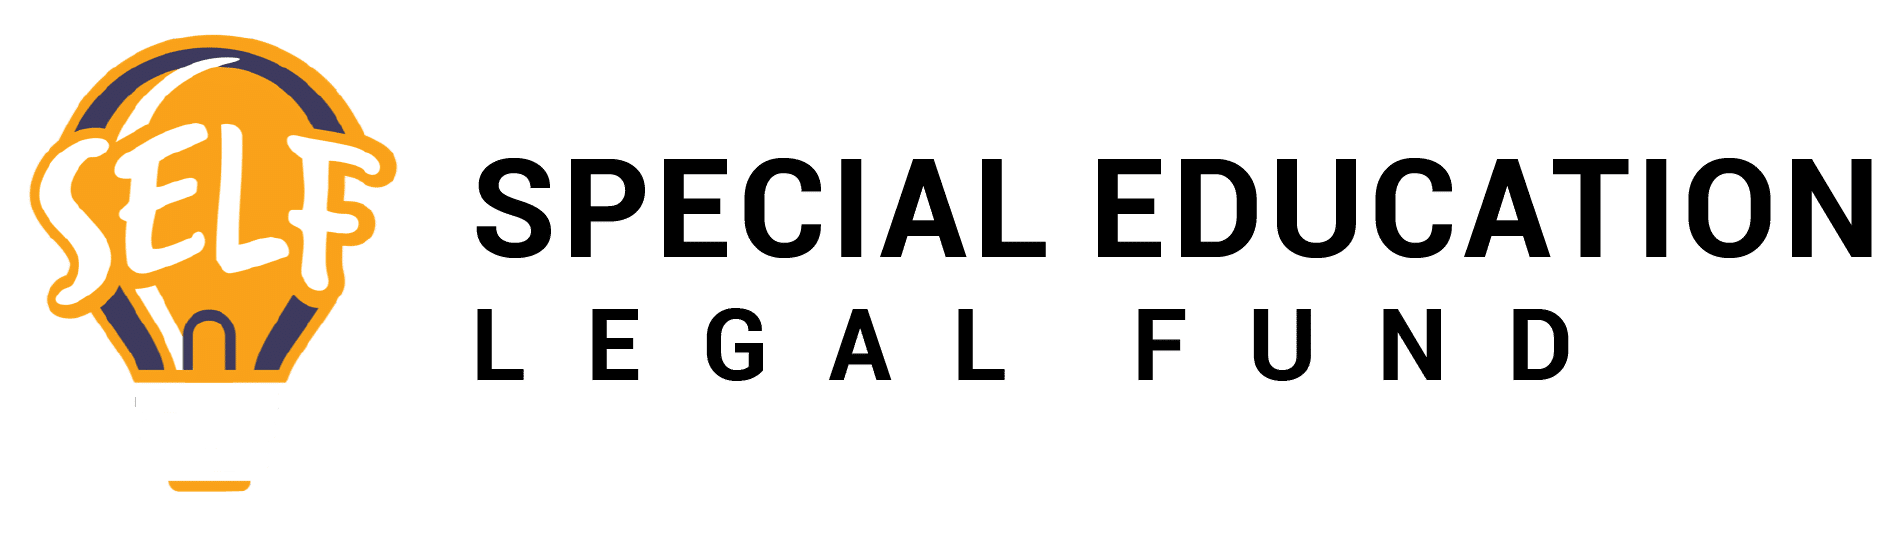 SELF Special Education Legal Fund